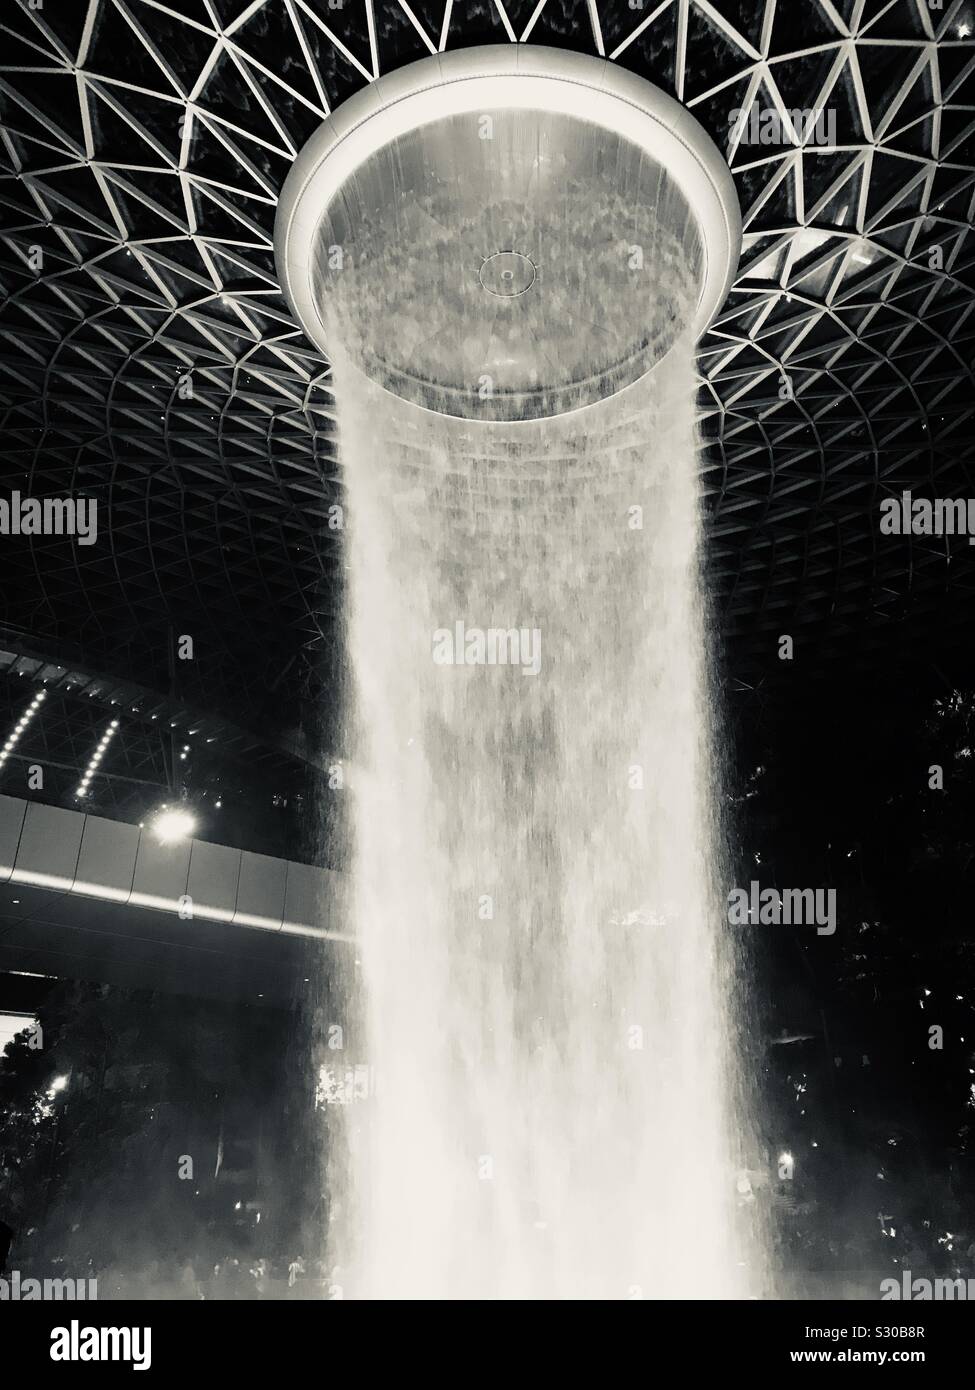 Silver colour- HSBC rain Vortex in Singapore Jewel Changi Airport- water gushing from 7 storey height Stock Photo